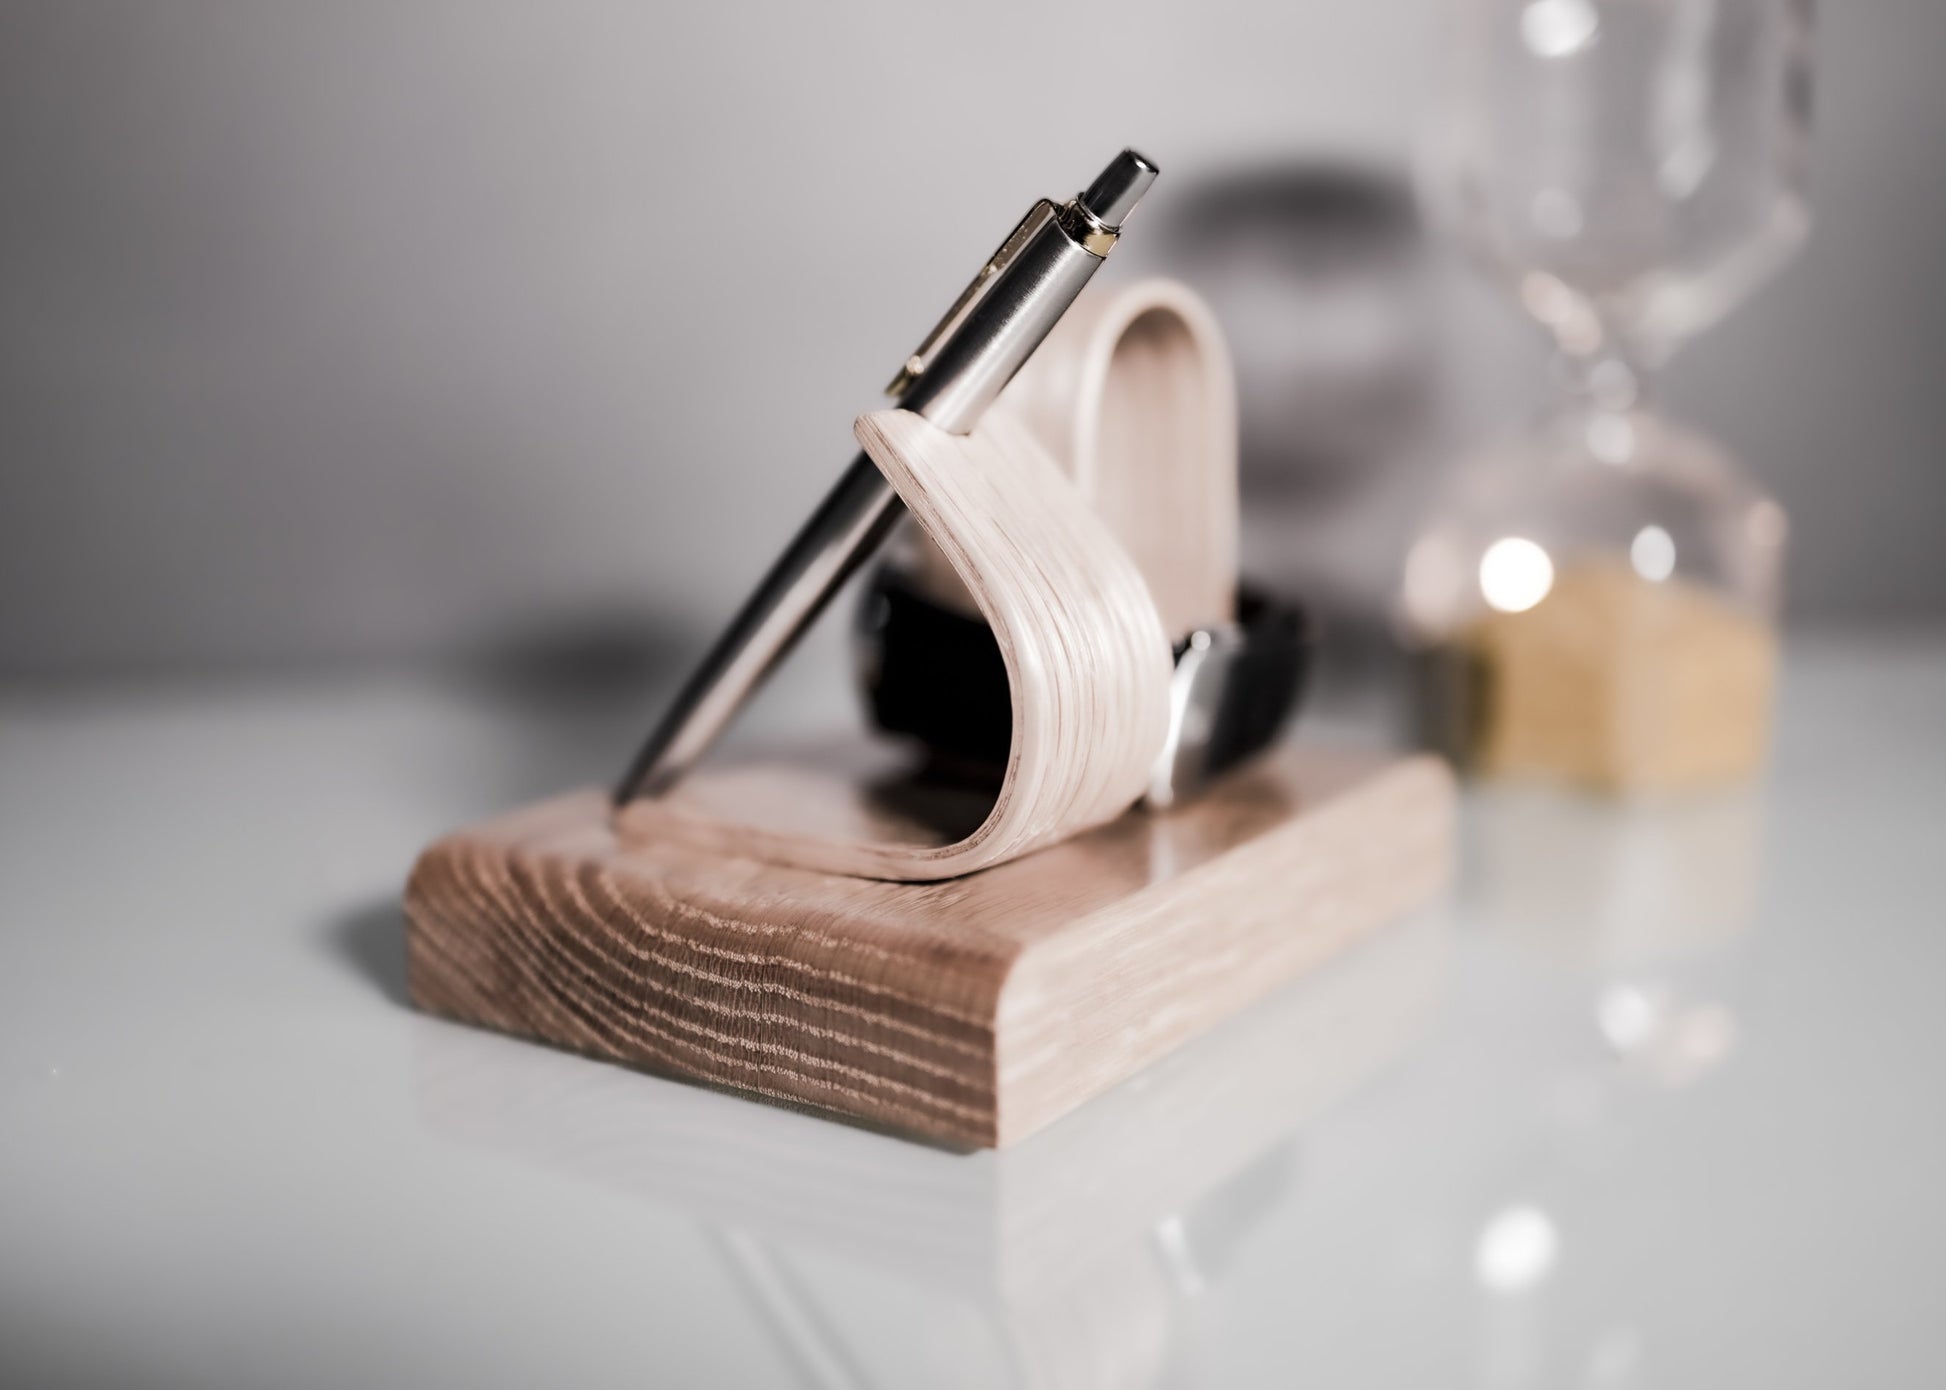 Personlised Watch stand and pen stand by noir.design